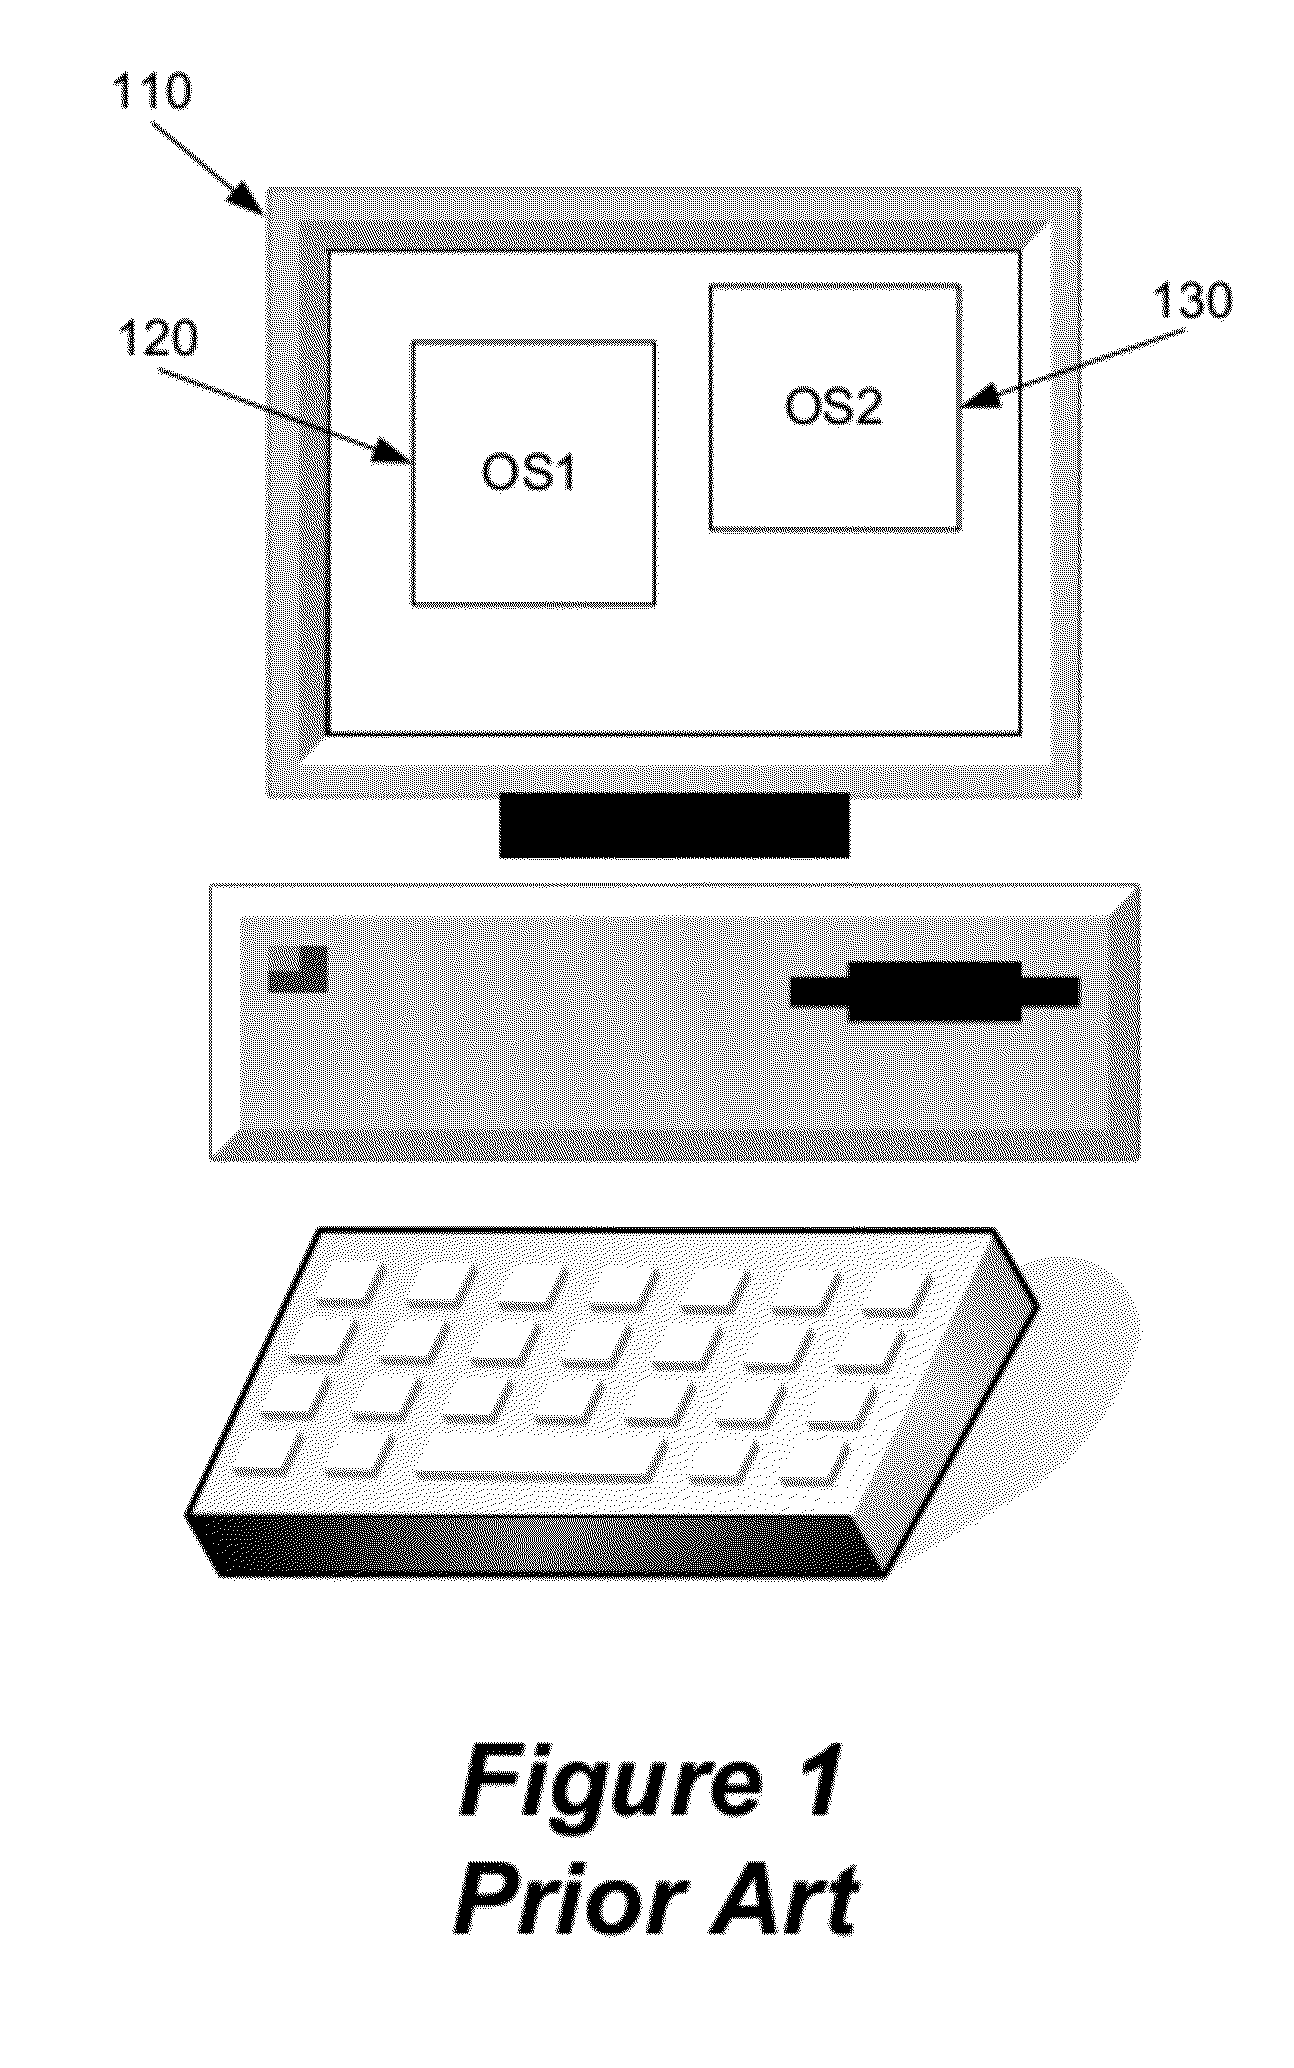 System and method for monitoring a grid of hosting resources in order to facilitate management of the hosting resources